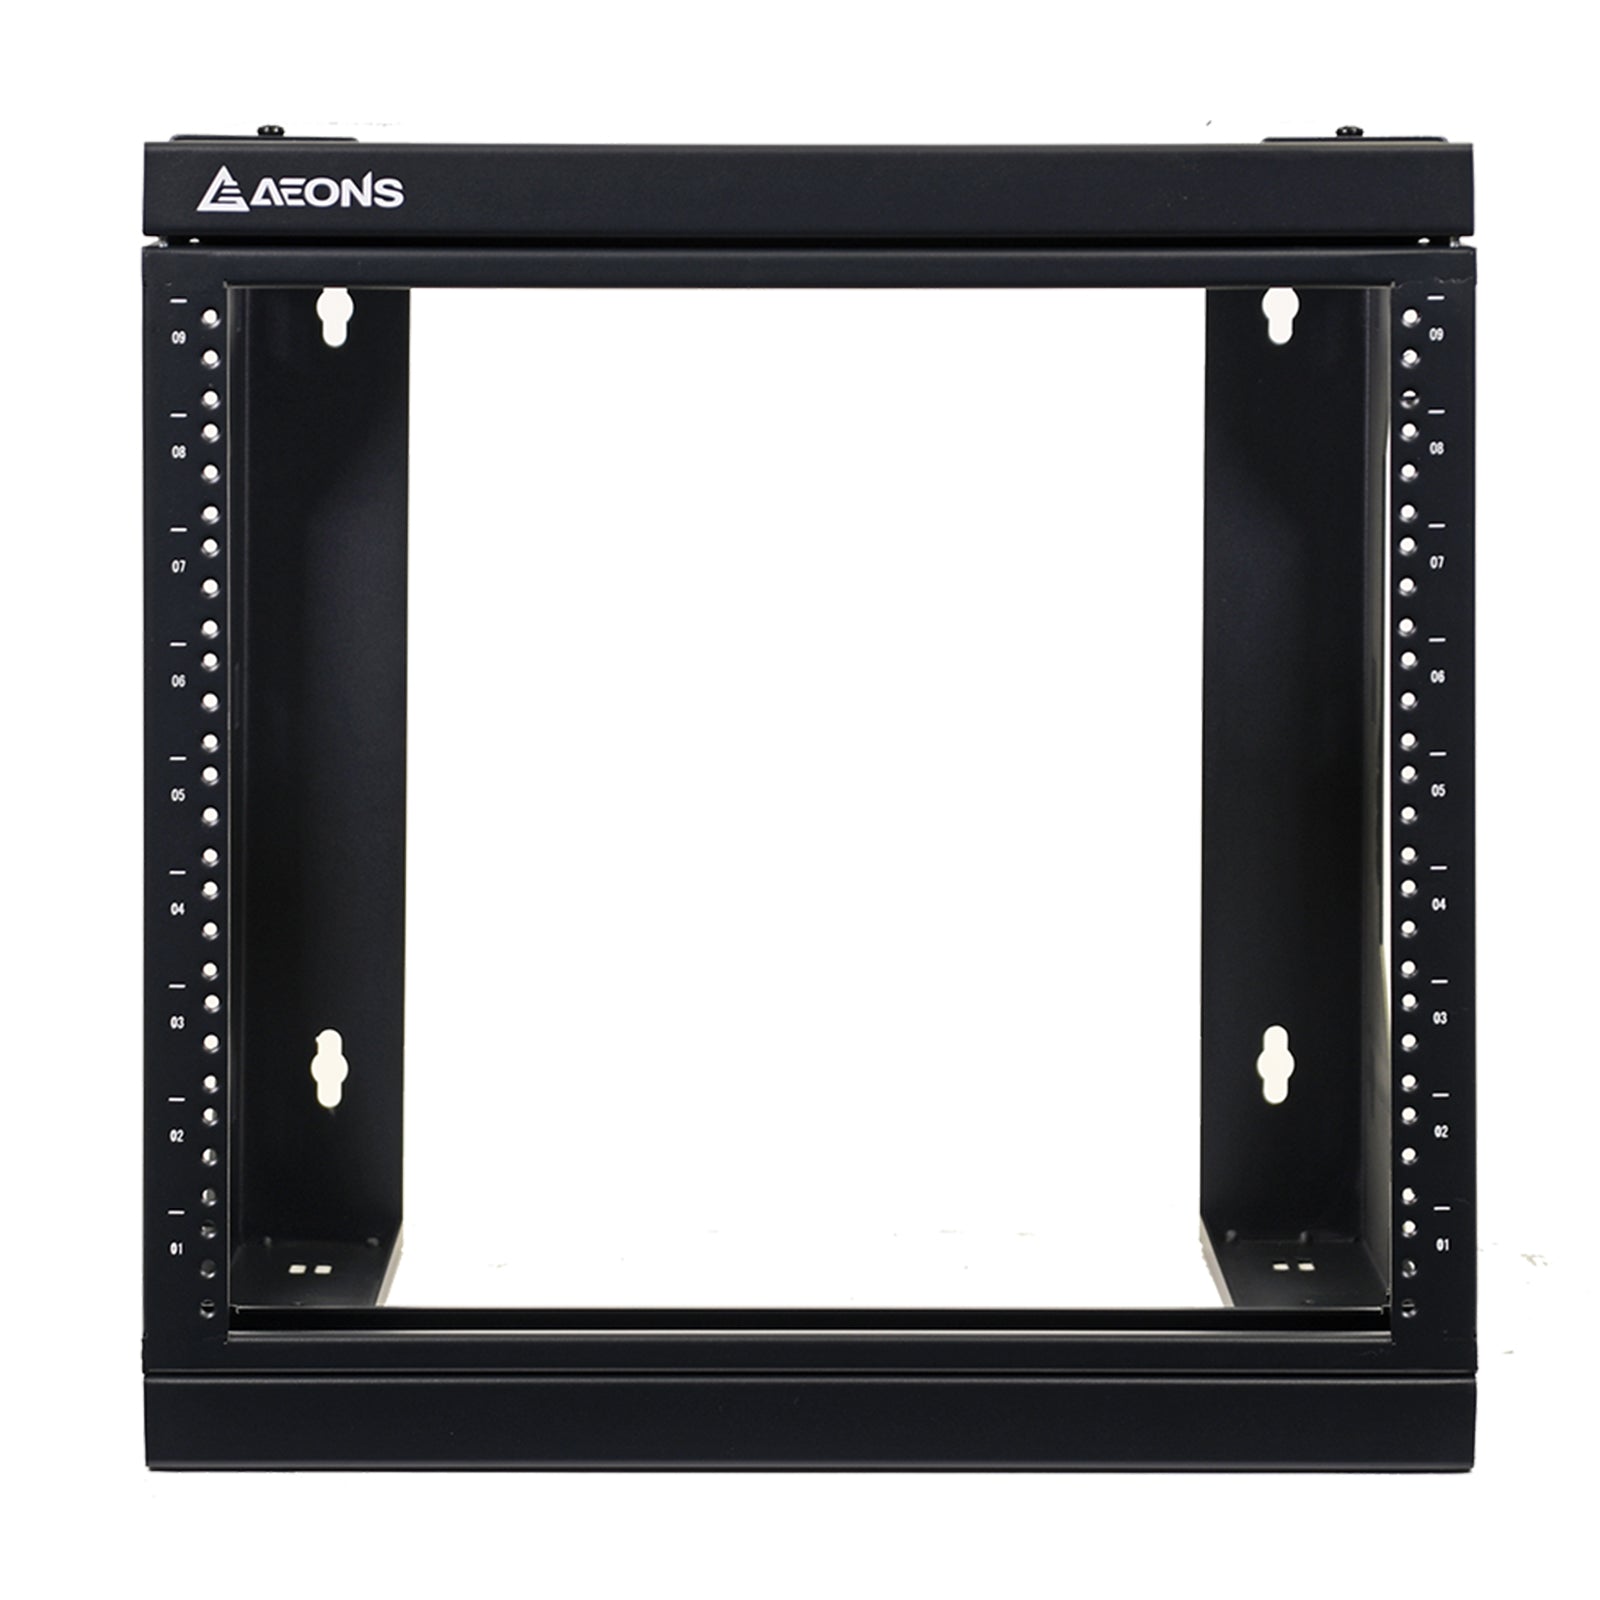 Aeons SBC Seires 9U Wall-Mount Open-Frame Rack, Adjustable-Depth, Swing Out Hinged Gate